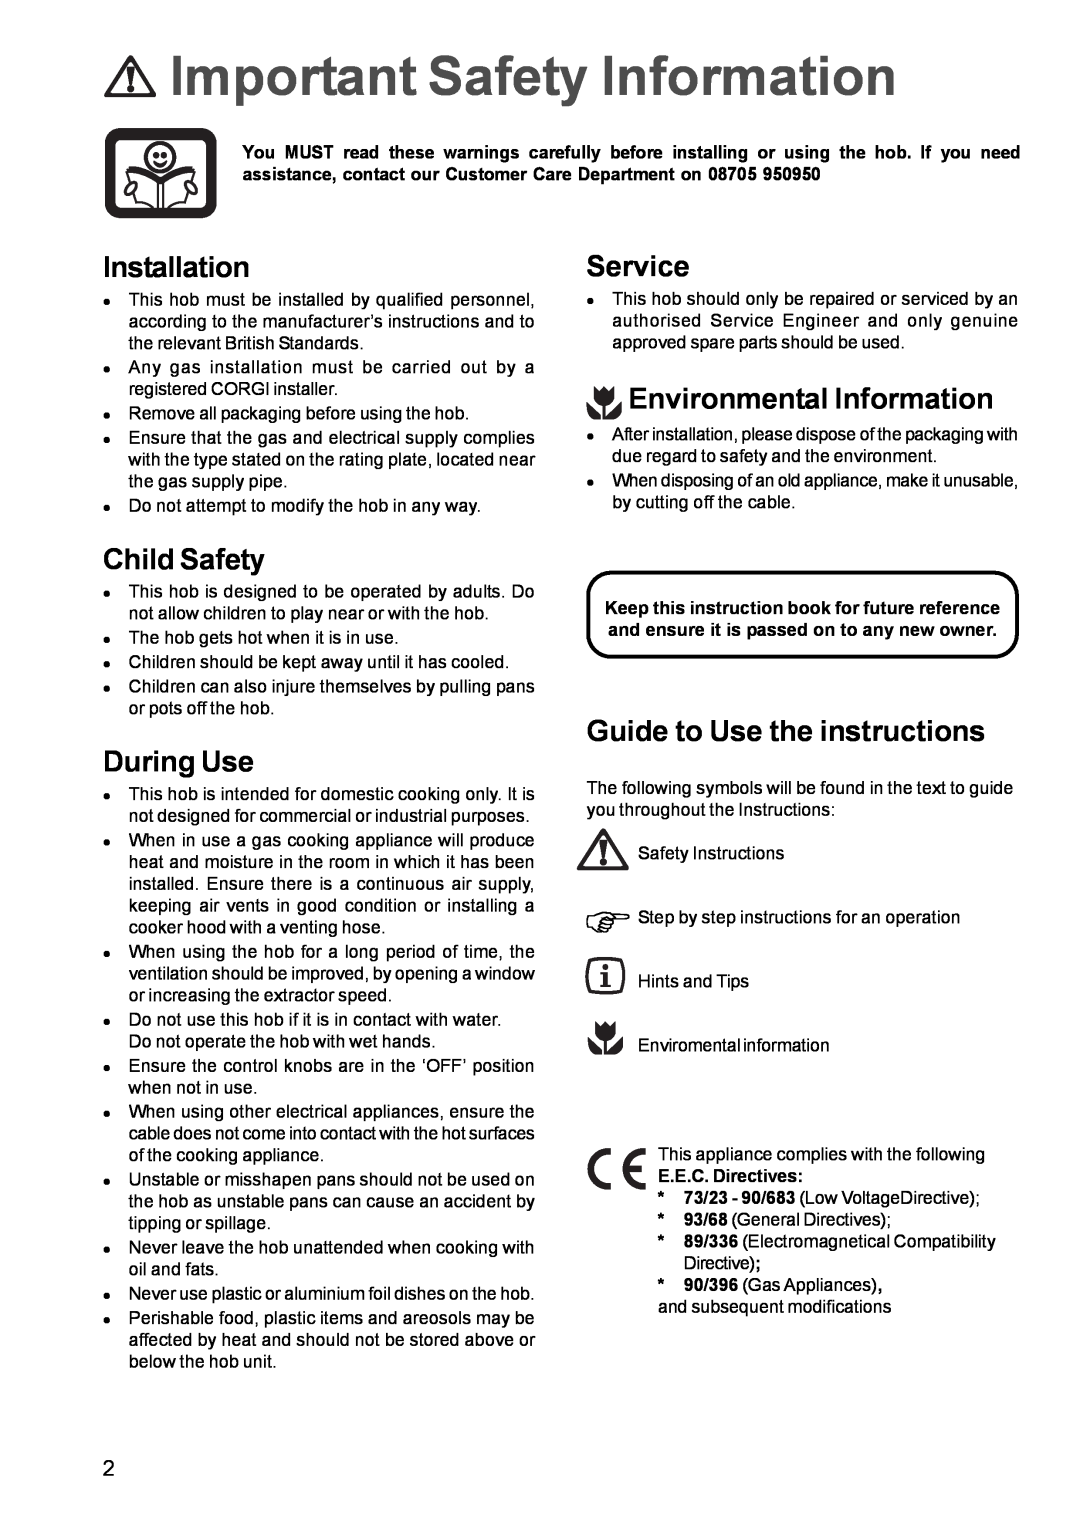 Electrolux EGG 690 manual Important Safety Information, Installation, Service, Environmental Information, Child Safety 